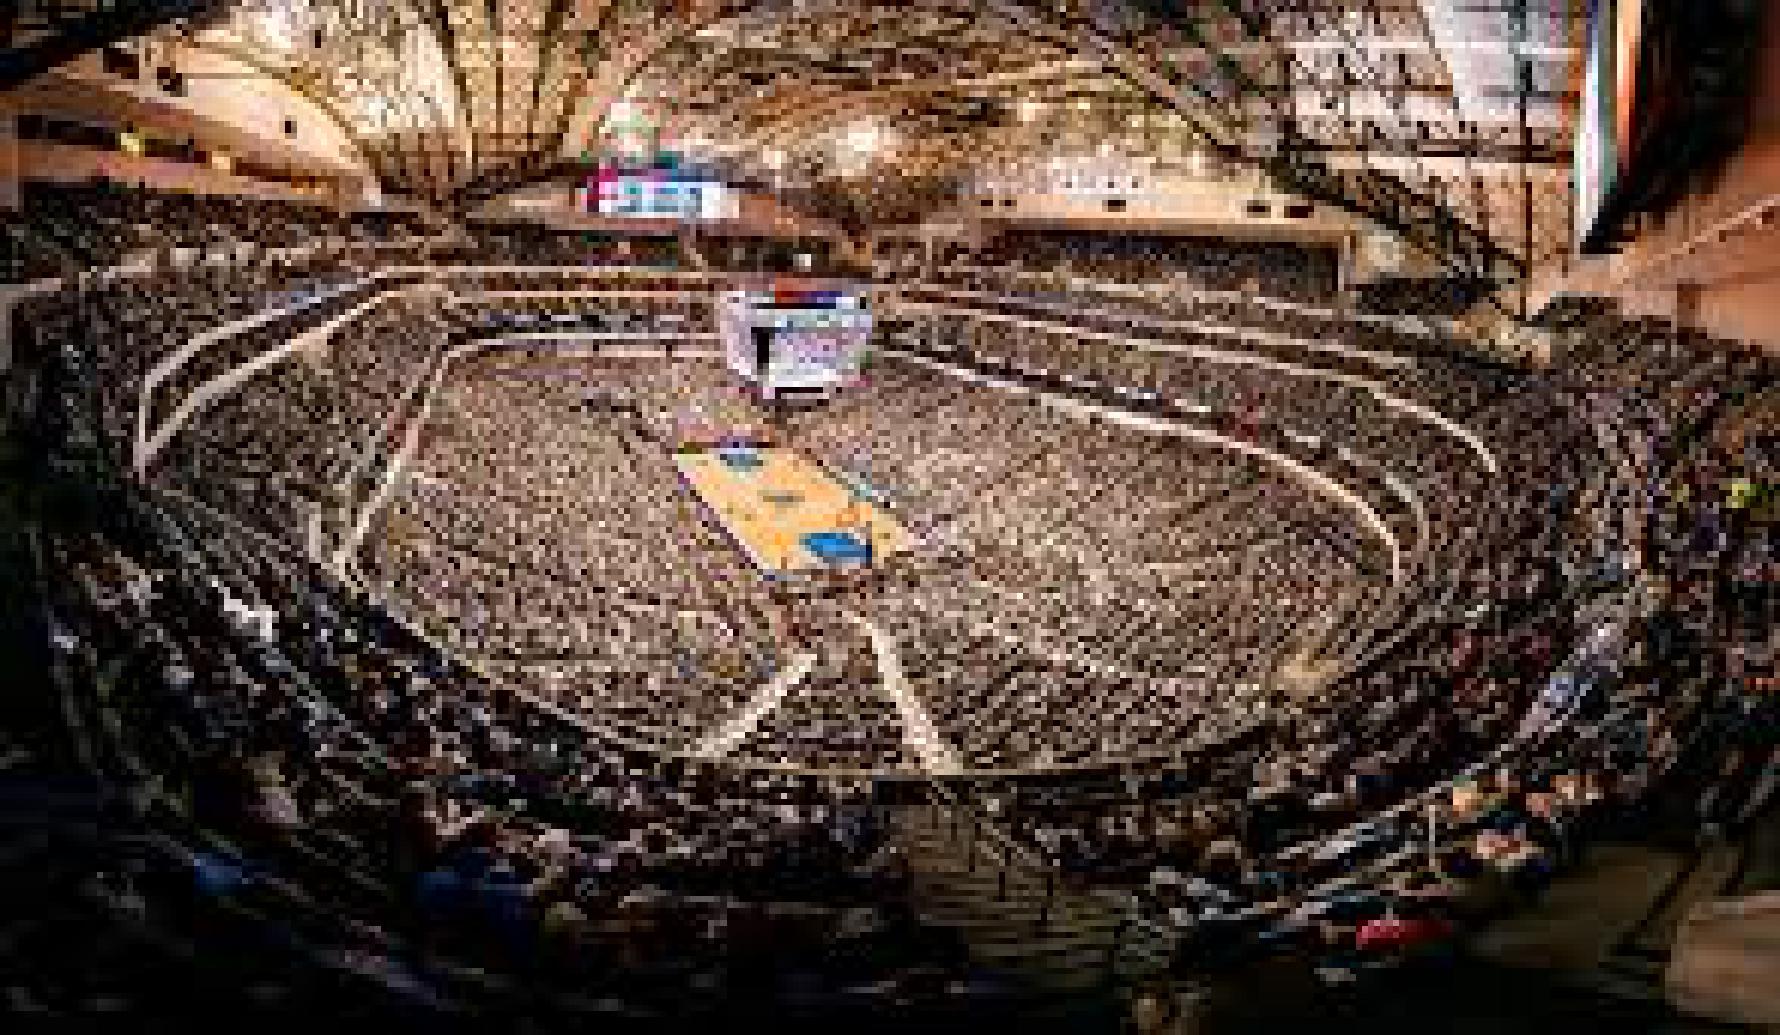 how to tour american airlines center